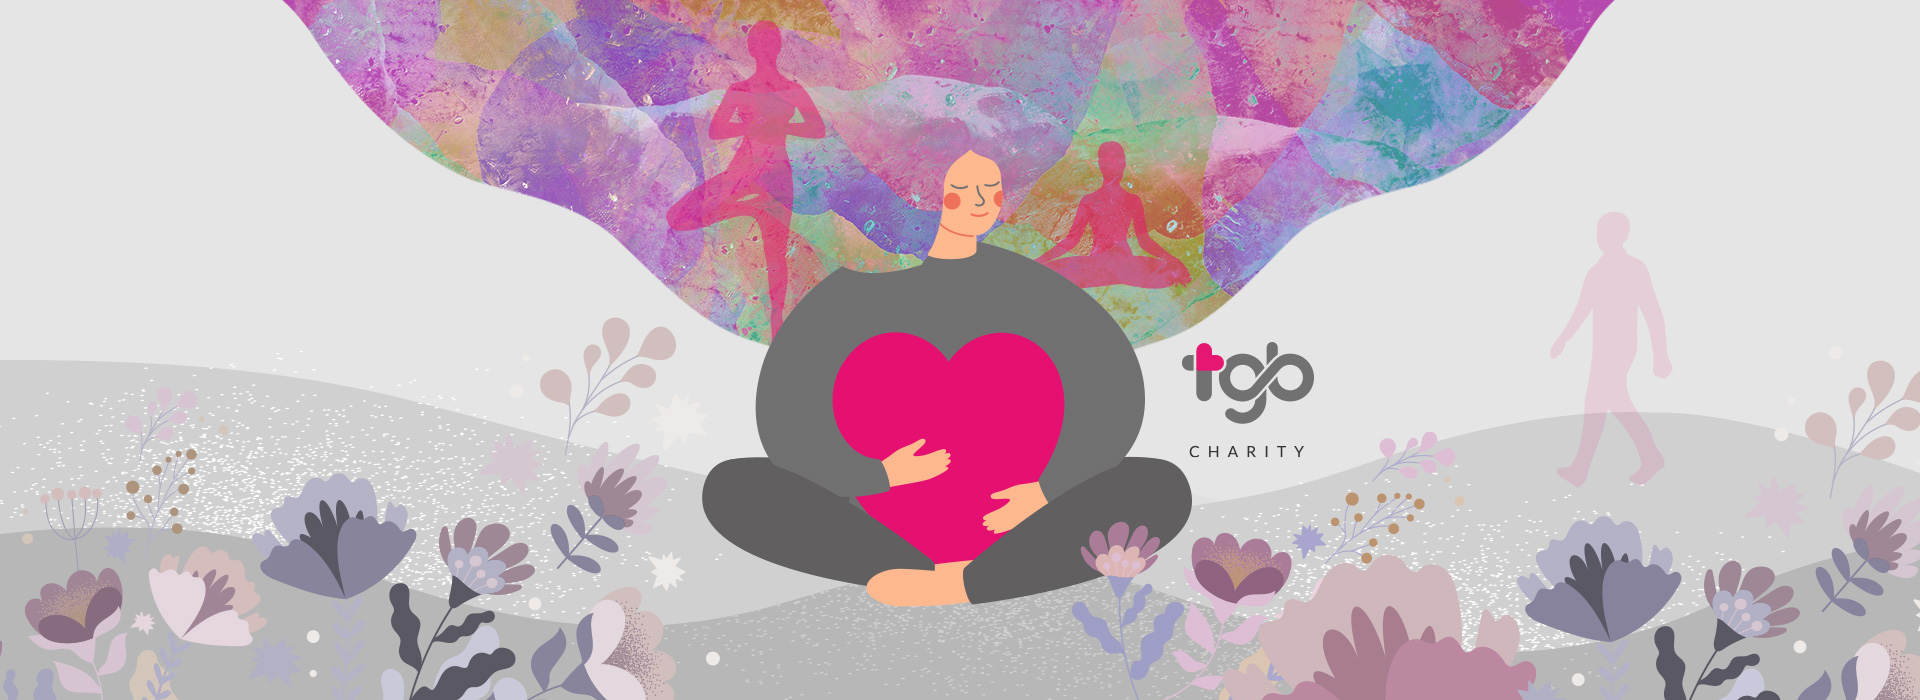 Caring for your mental health - TGB Charity